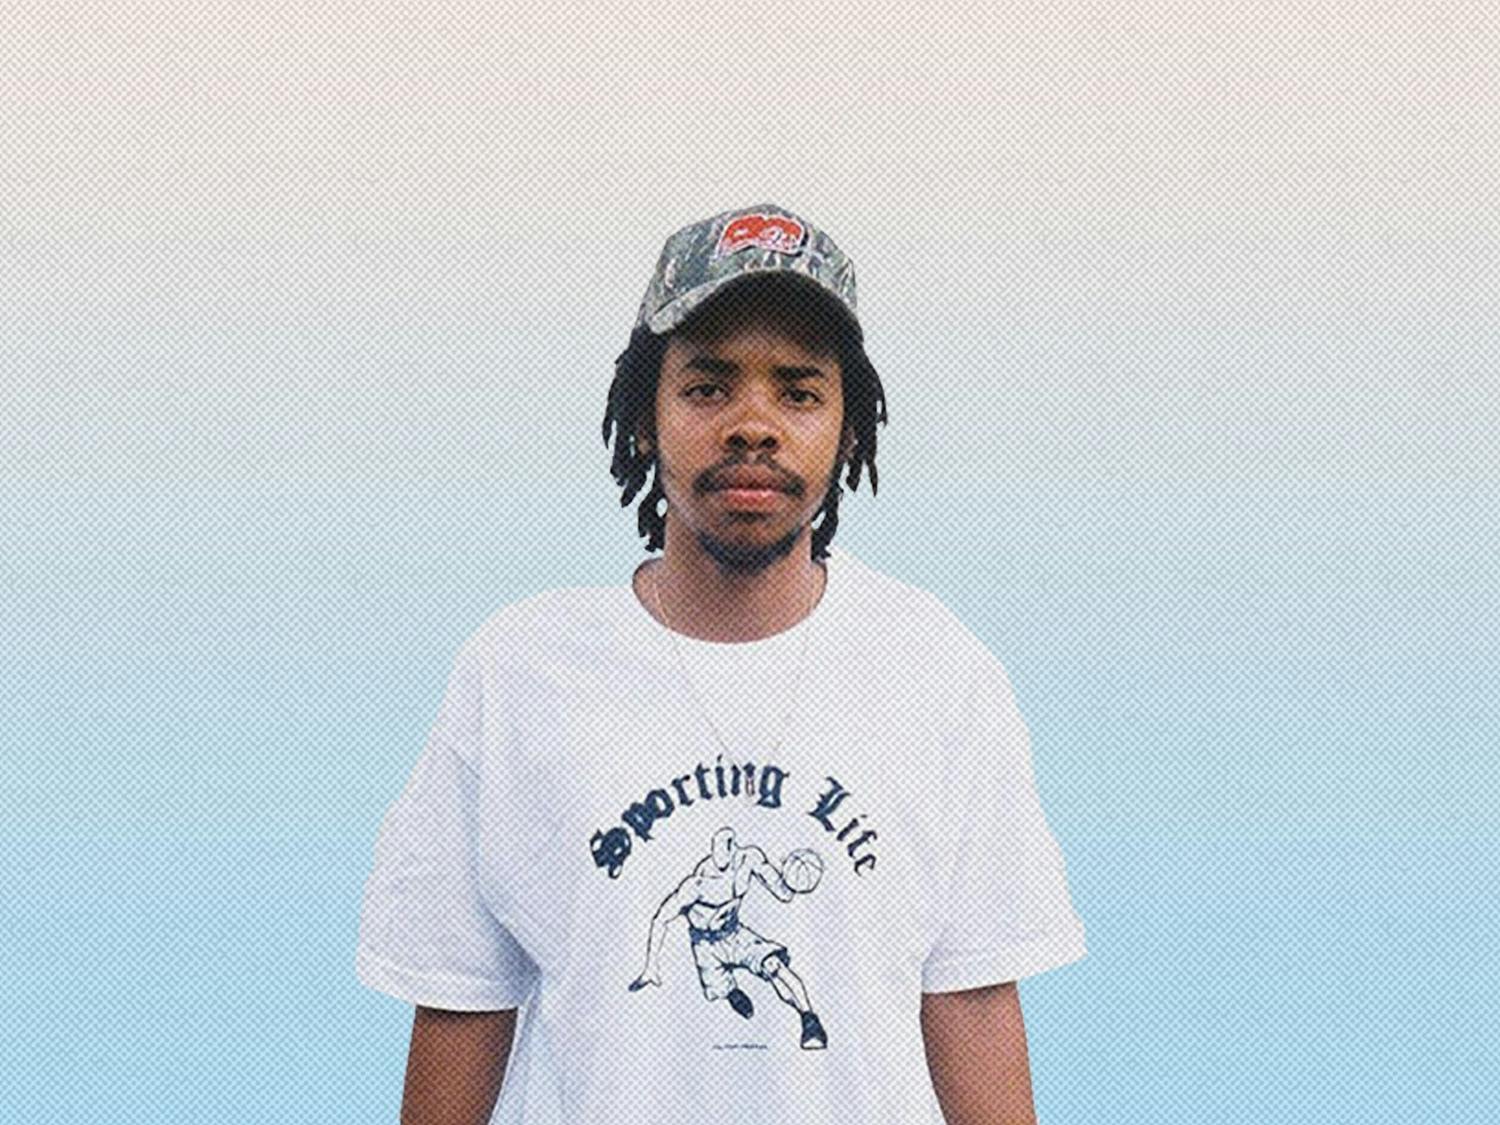 Musician Earl Sweatshirt's controversial track "EAST" continues to beguile and bewilder fans who can't stop trying to figure out what the song means.